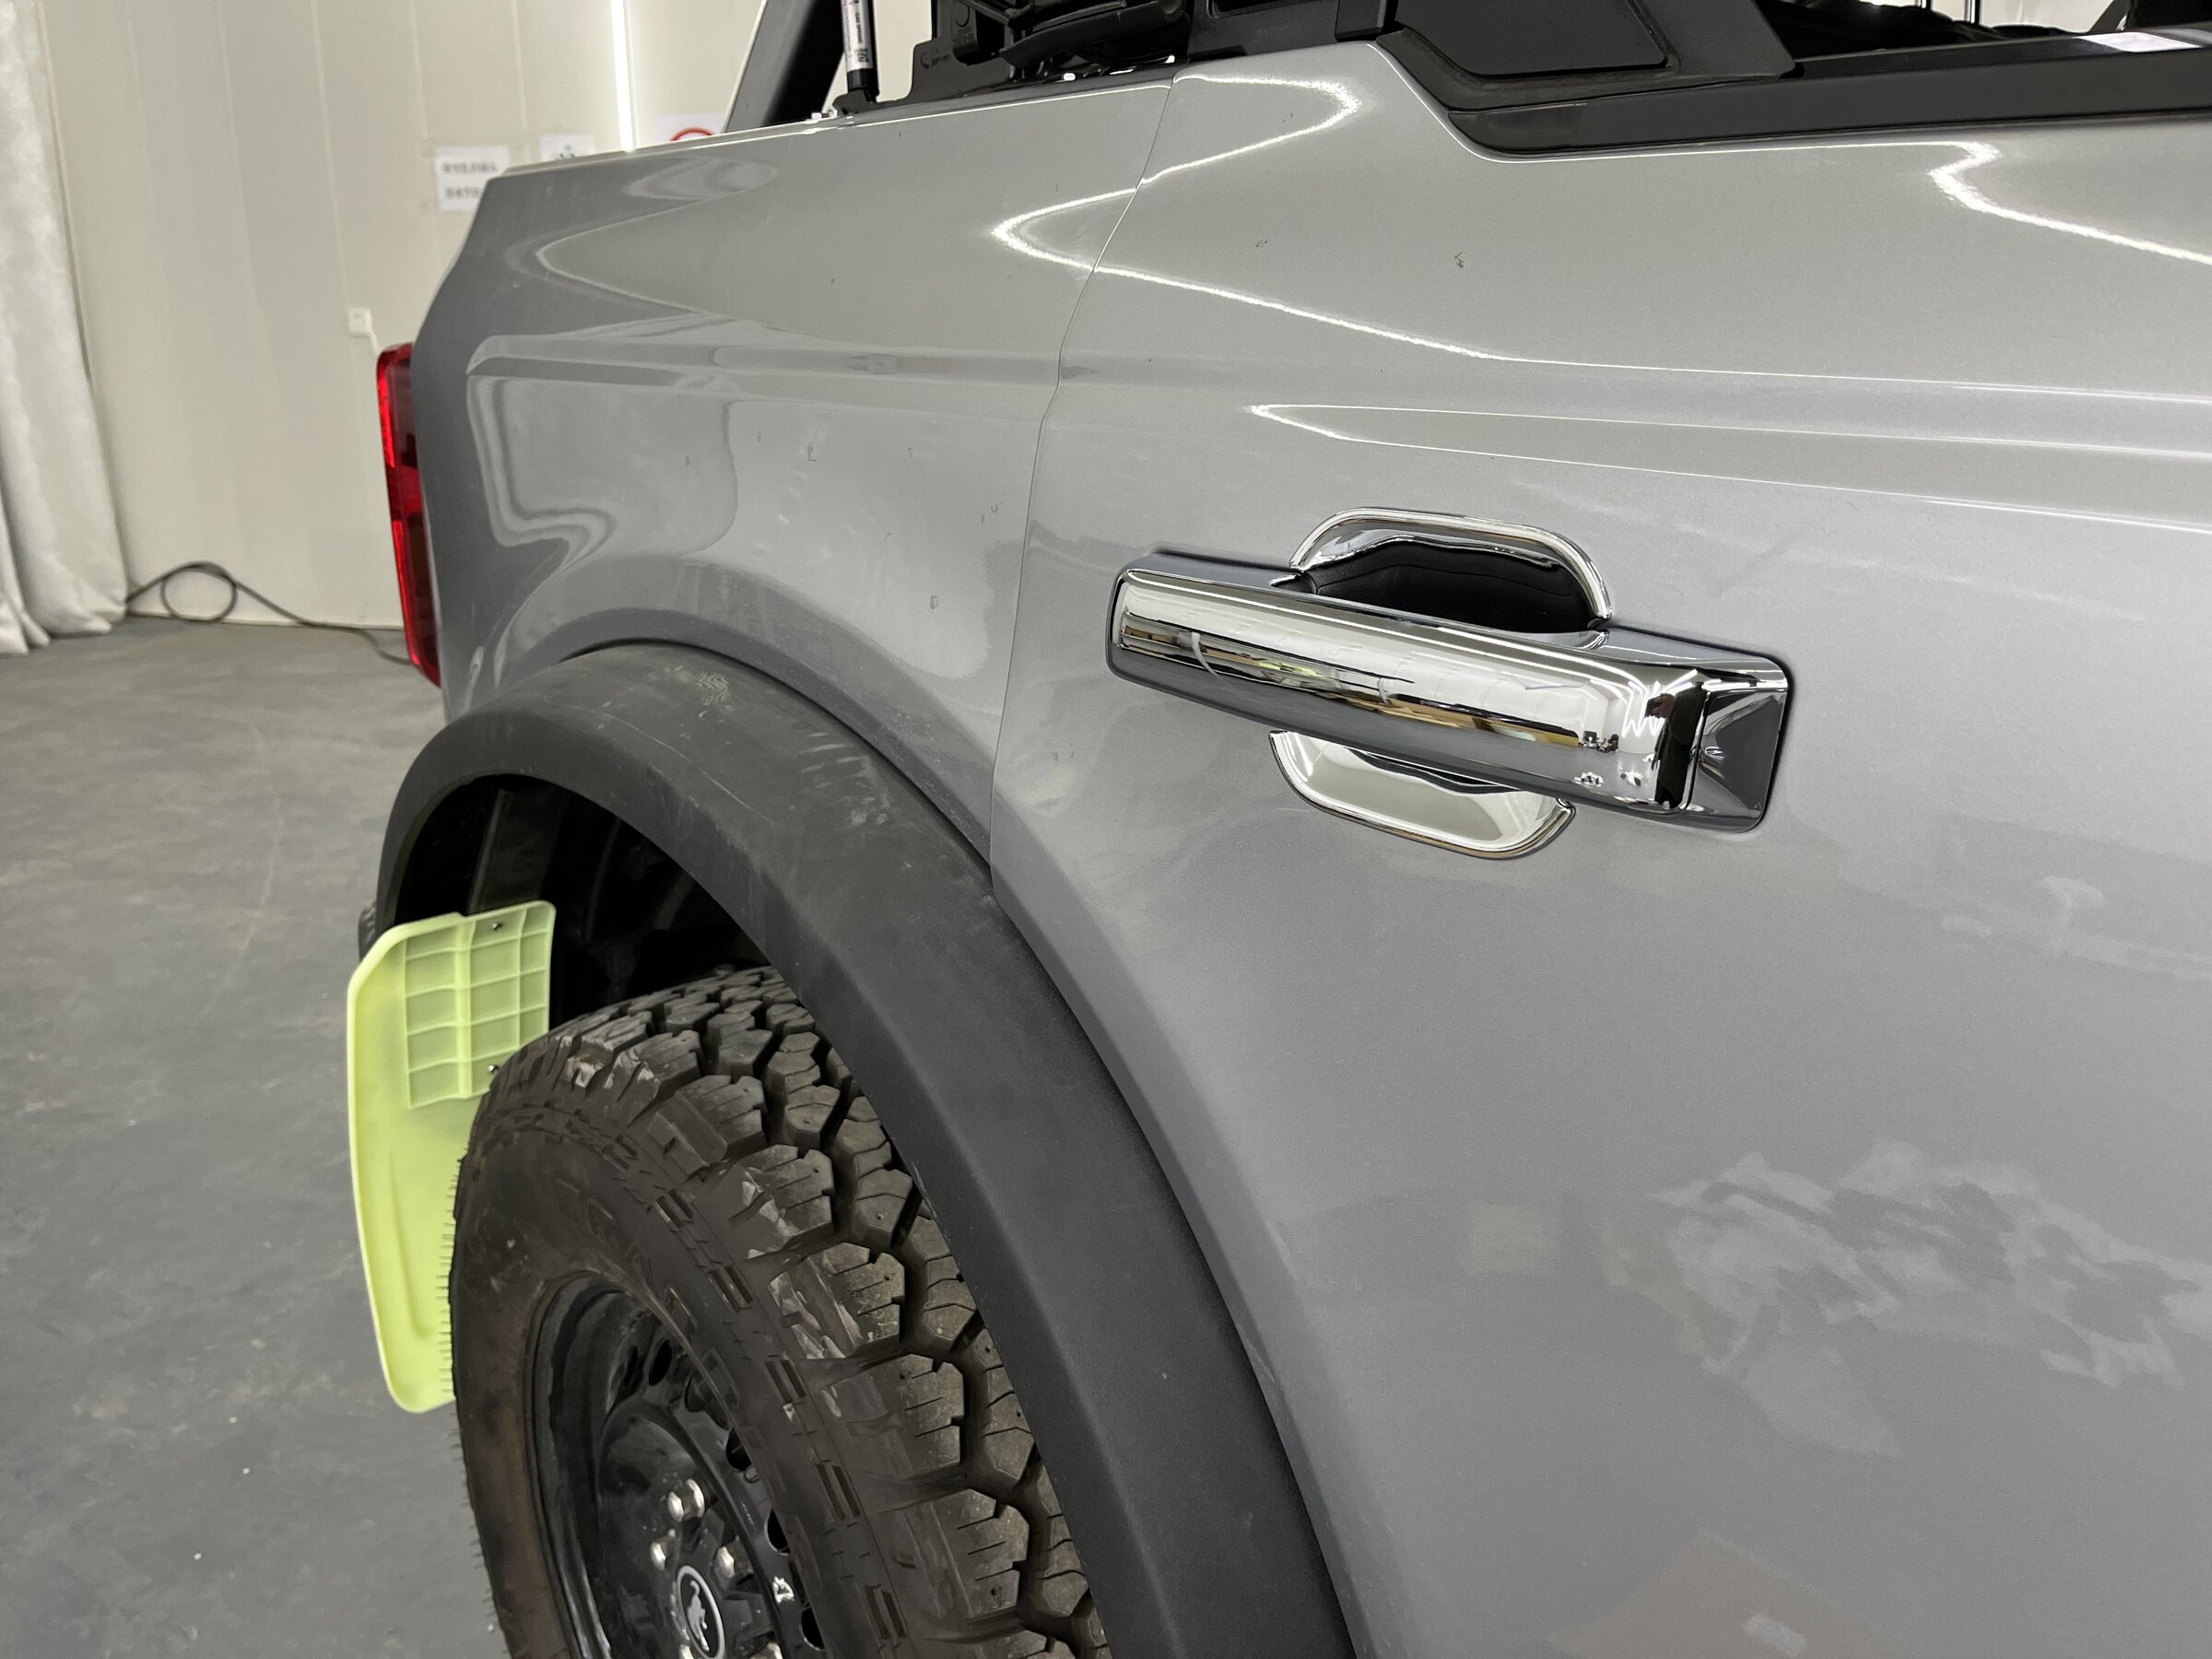 Ford Bronco Mabett wants to get suggestion about gas cover modification and Door handles and key/scratch guard mirror